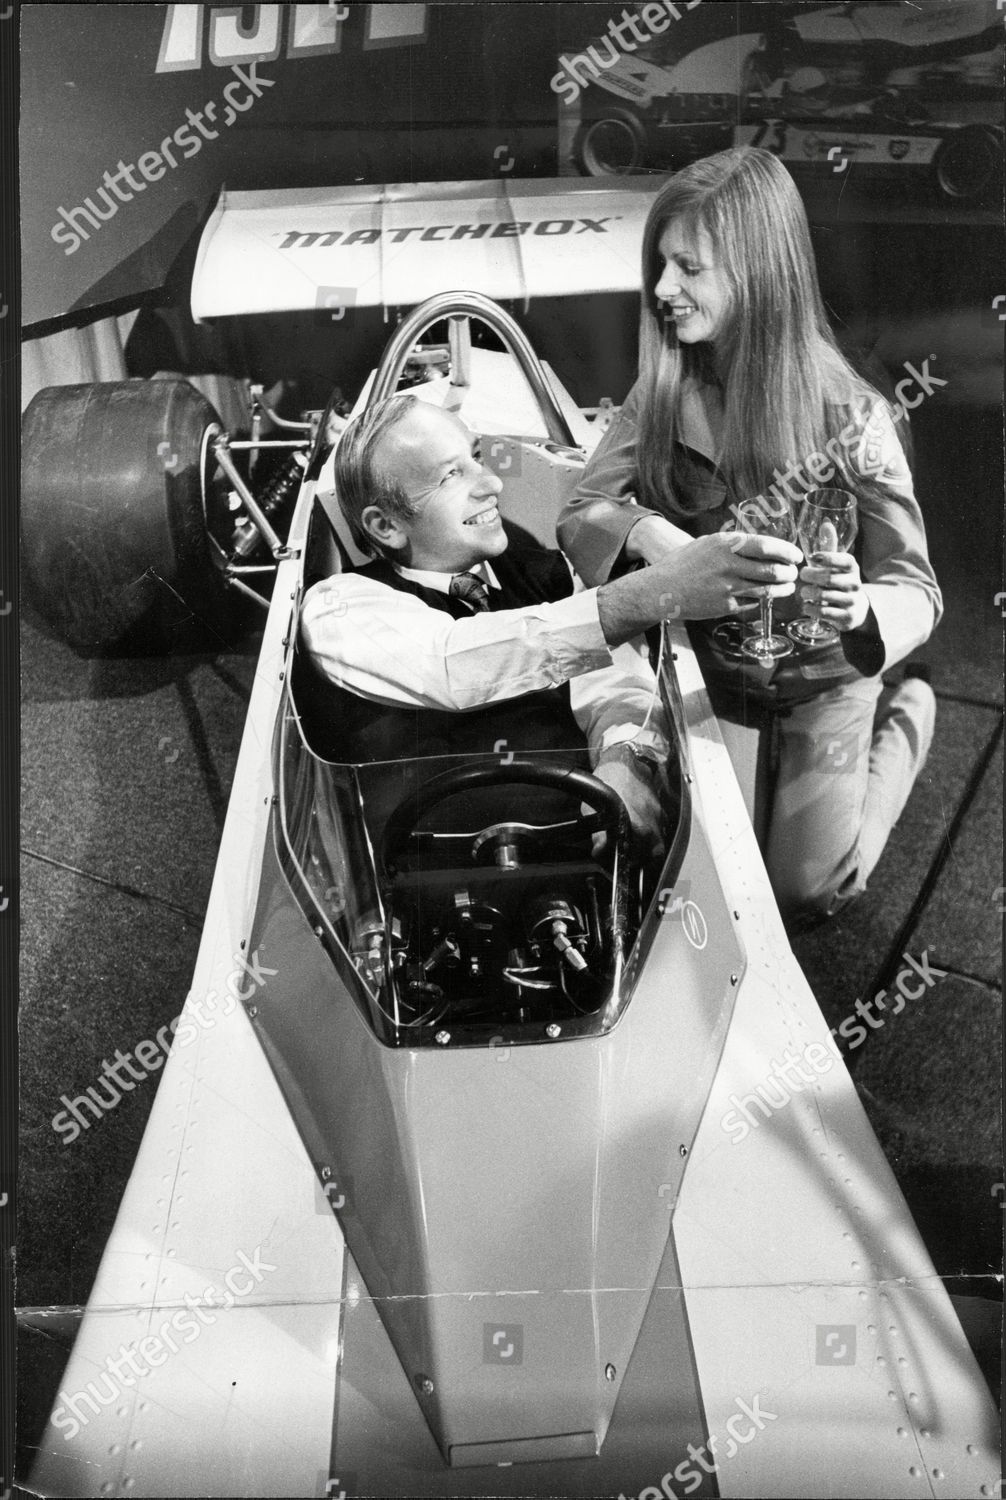 John Surtees in his new Formula 2 car gets a champagne toast from model Rebecca Shott.